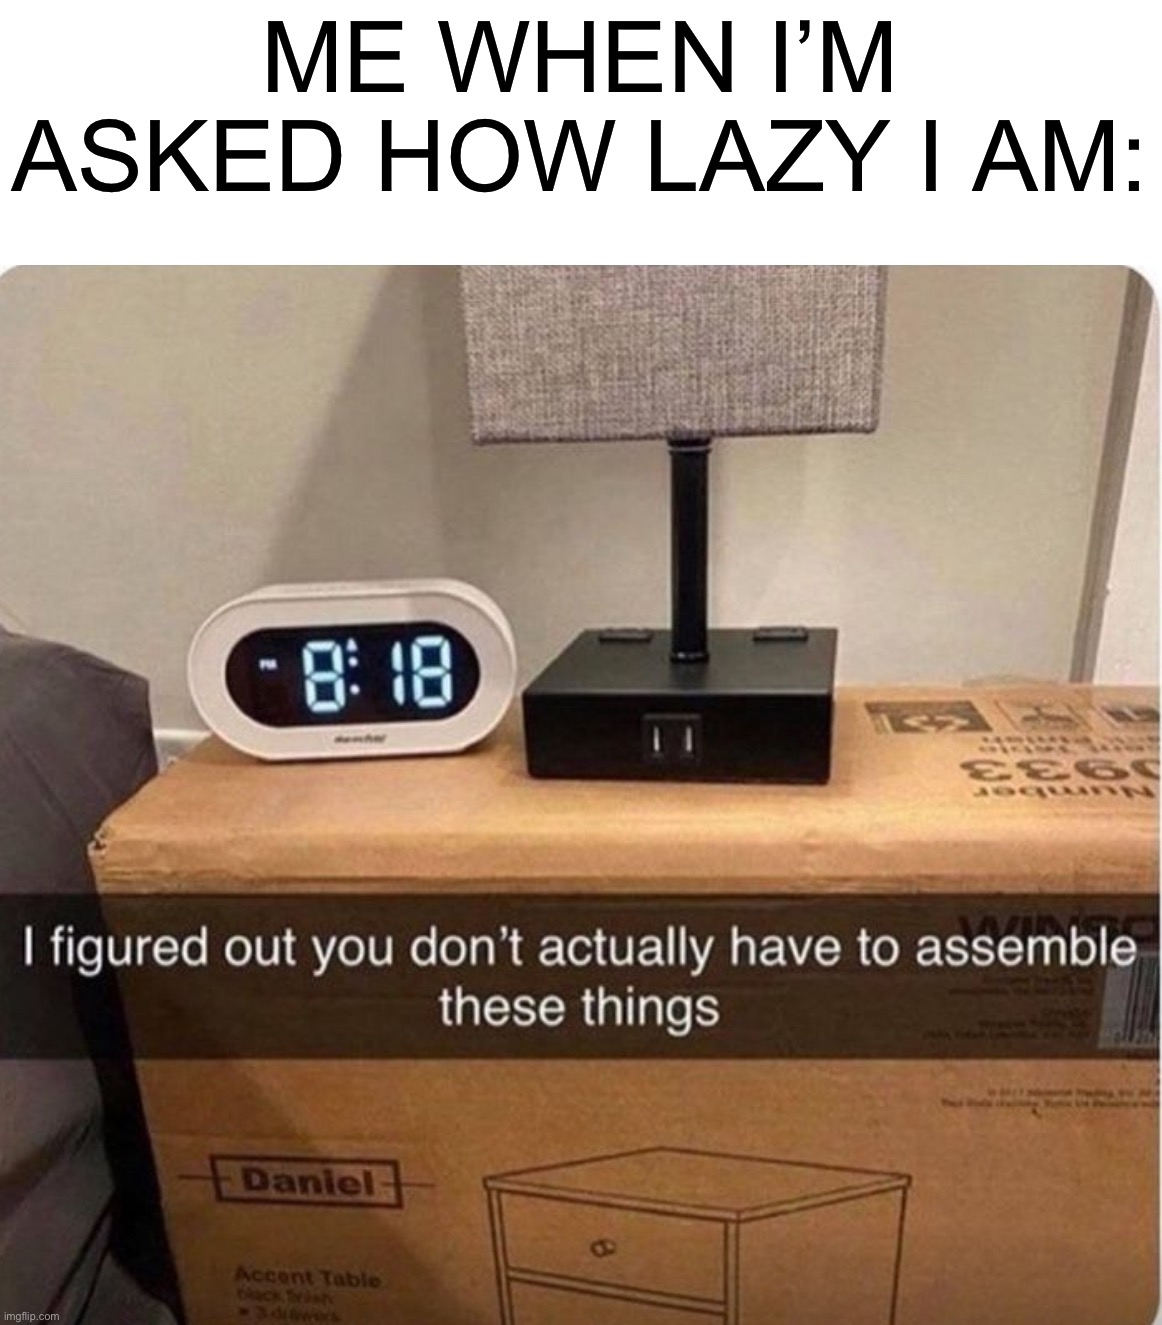 Who did this lol- | ME WHEN I’M ASKED HOW LAZY I AM: | image tagged in memes,funny,smart,genius,woah,table | made w/ Imgflip meme maker